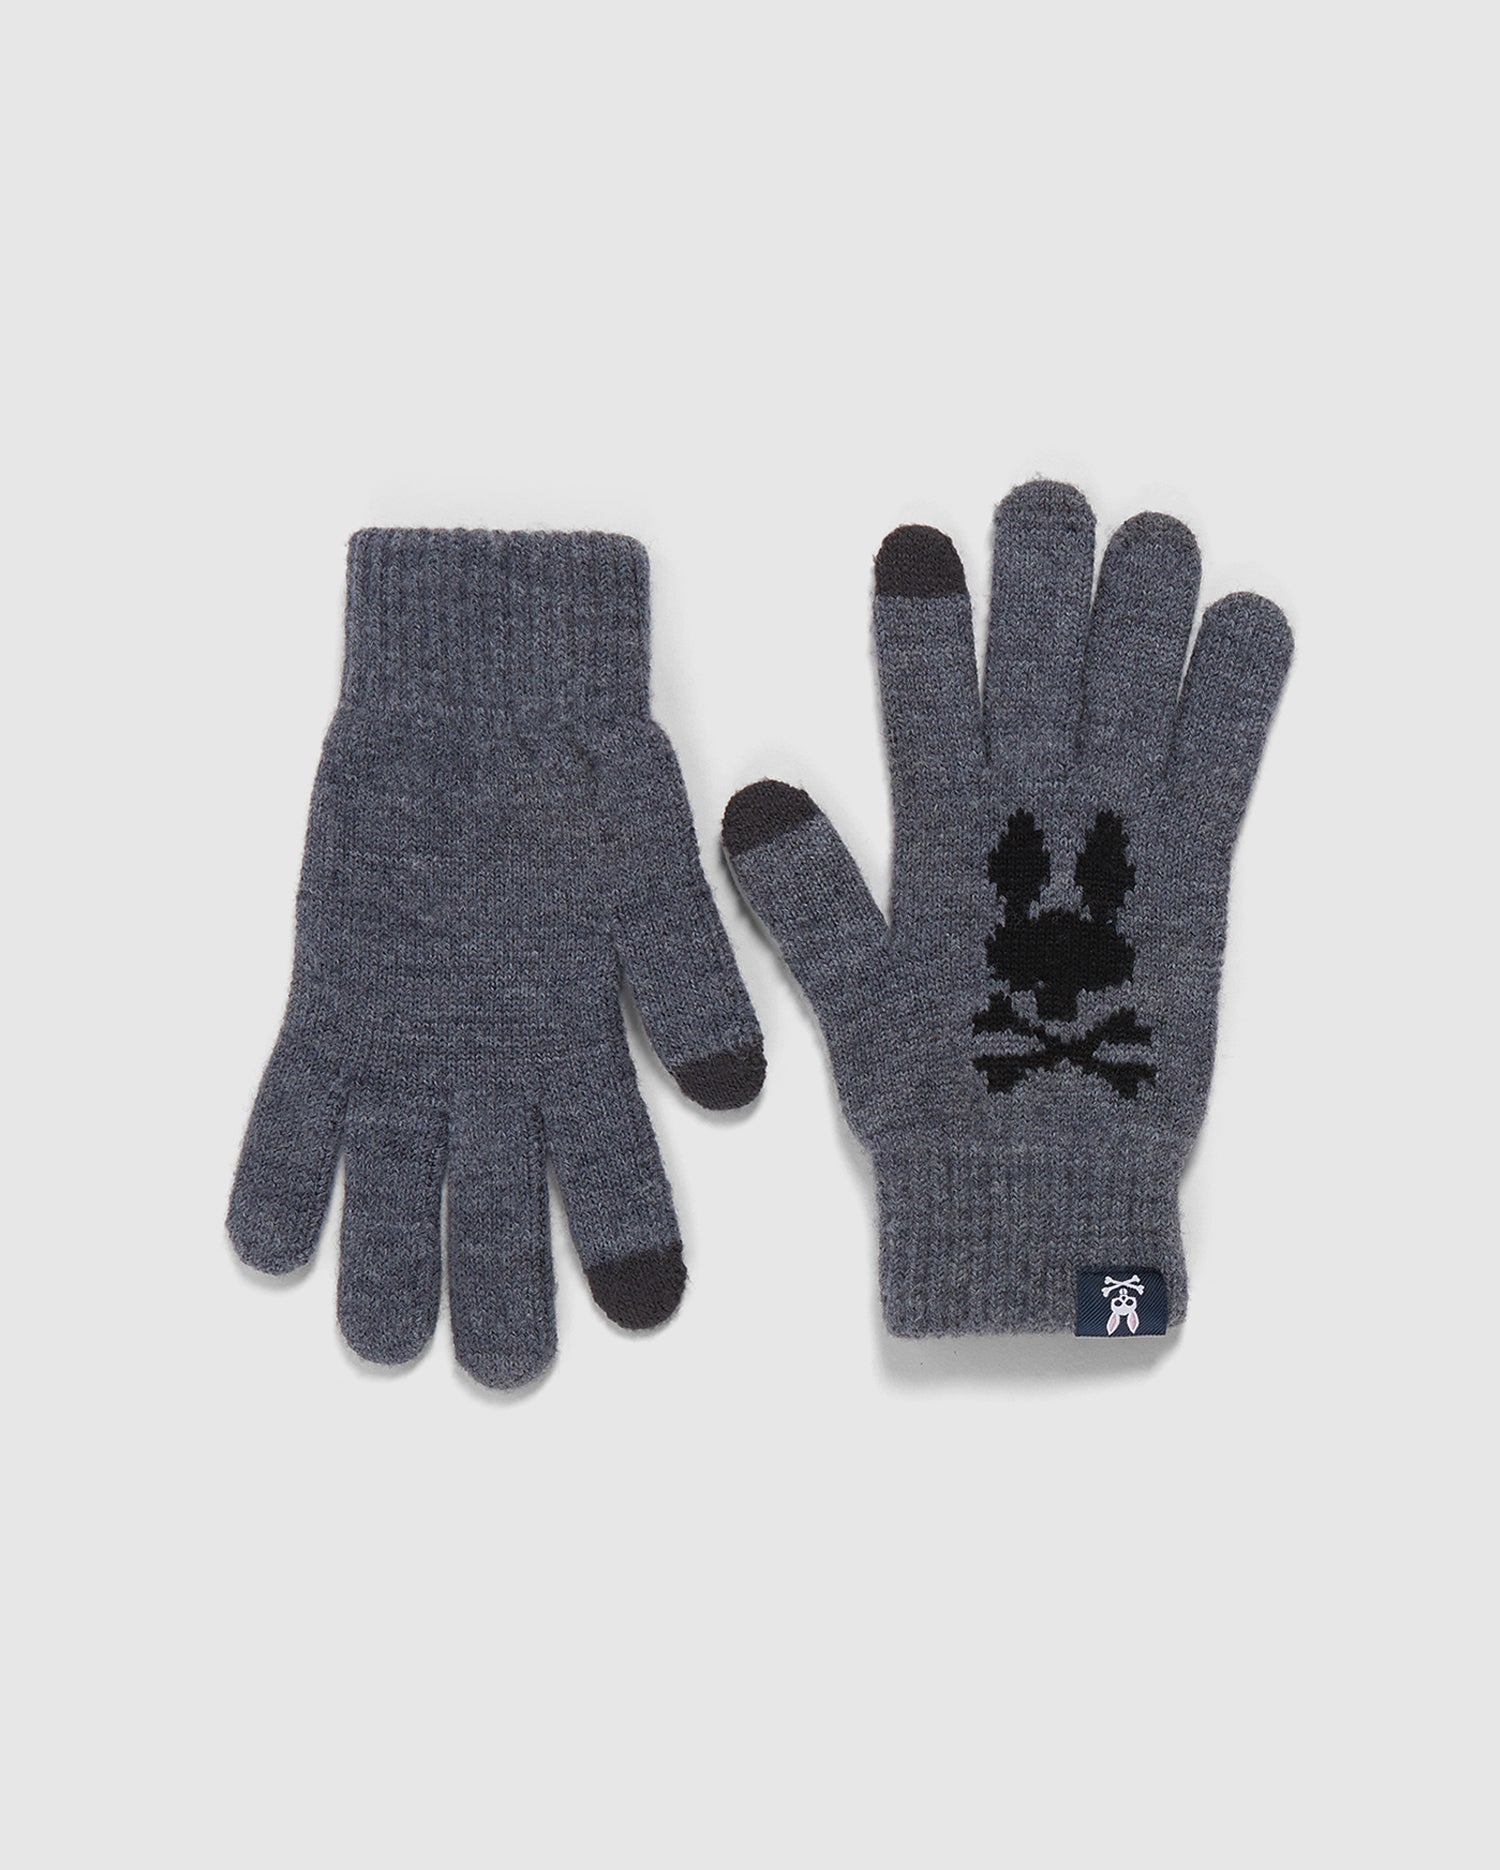 MENS WOOL GLOVES B6A998U1GL FINGER GREY WITH TOUCH